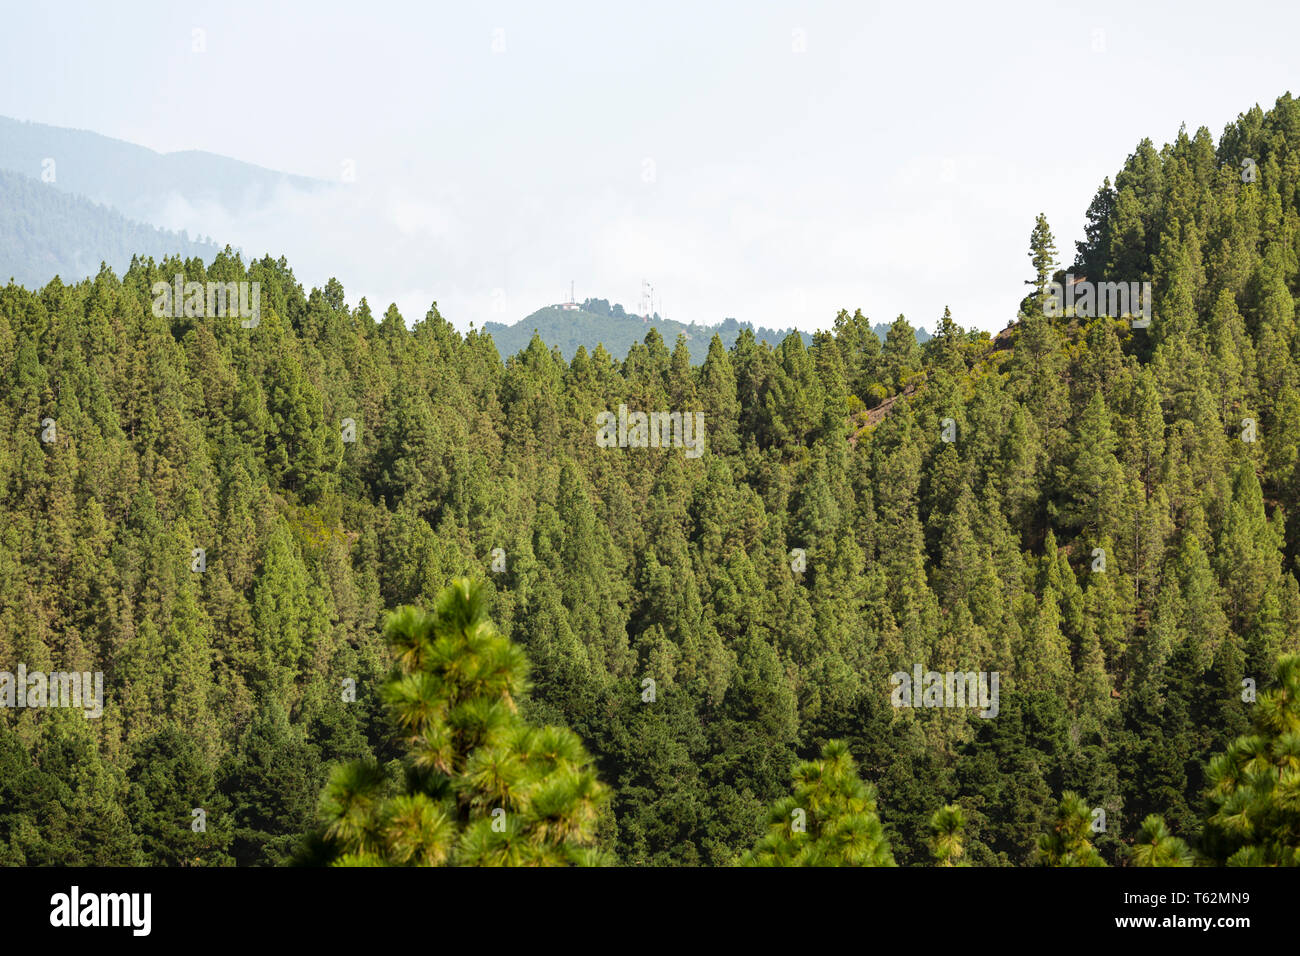 View over the pine forest of the Cumbre Vieja to the Cumbre Nueva in La Palma, Spain. Stock Photo